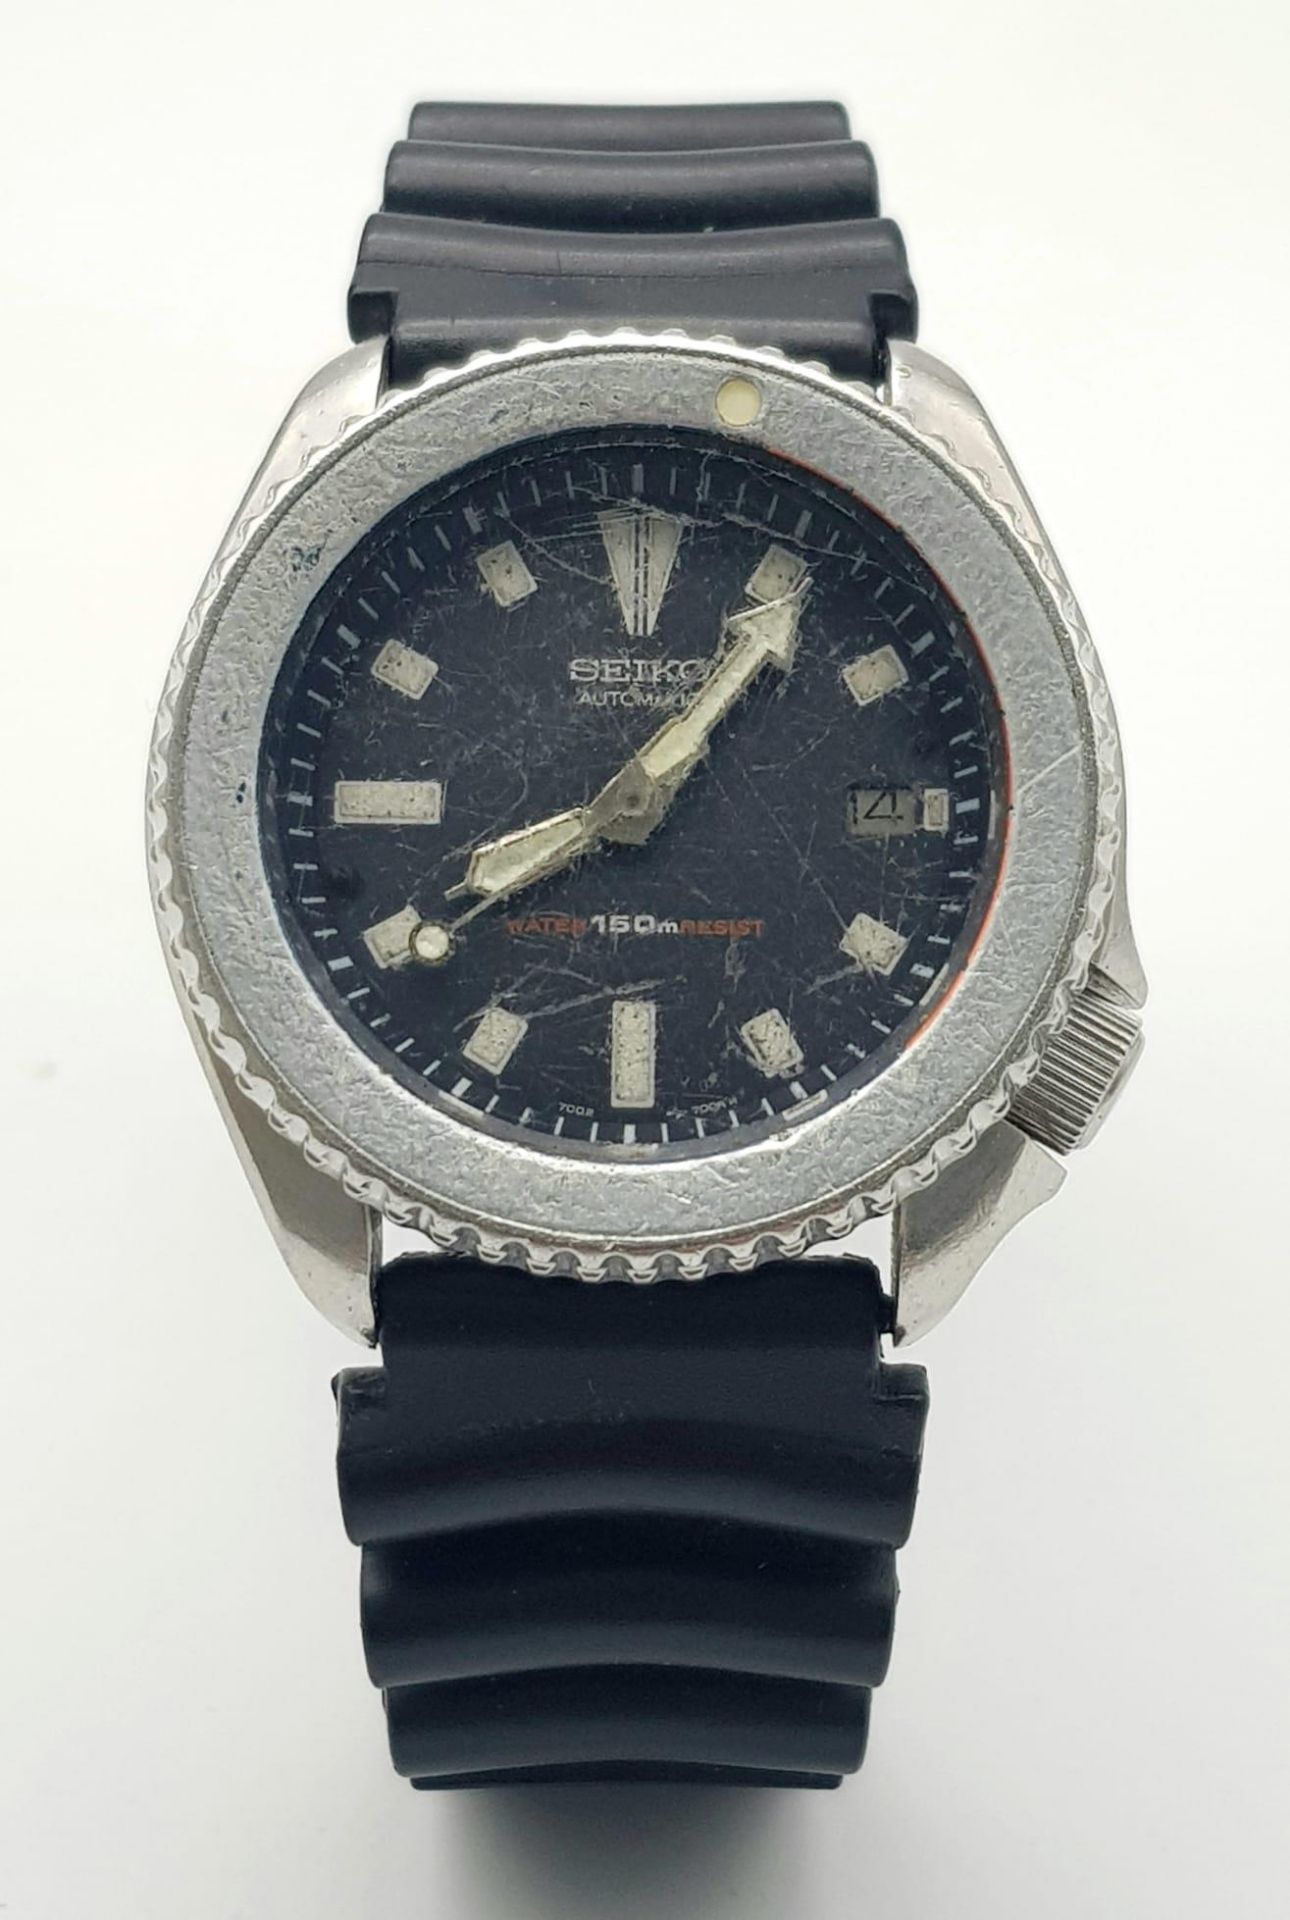 A VINTAGE SEIKO AUTOMATIC DIVERS WATCH (GLASS IS SCRATCHED)a/f - Image 2 of 5